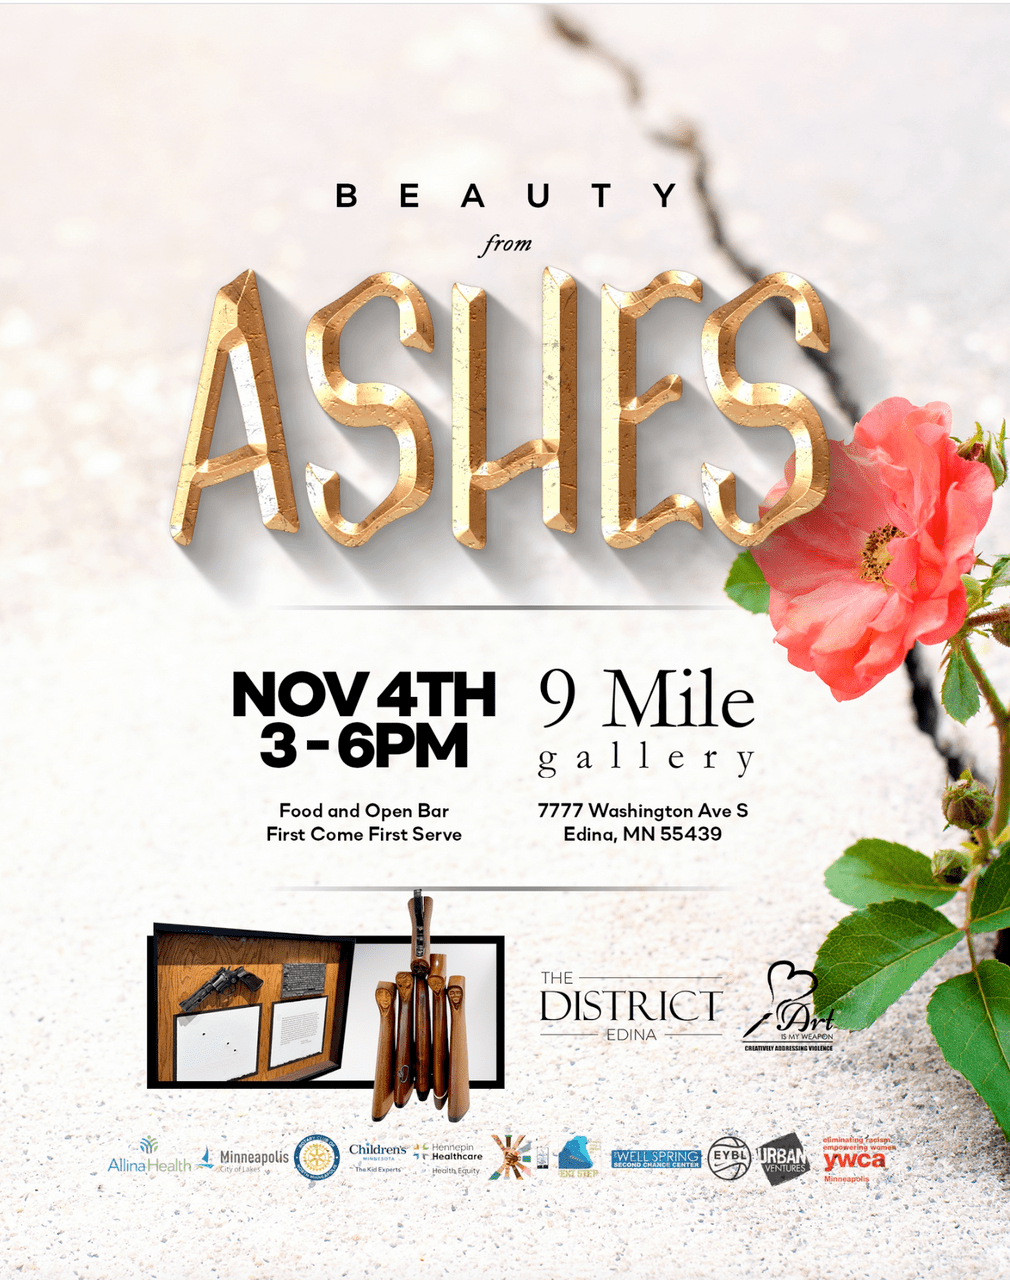 A promotional flyer for an event titled Beauty from Ashes.